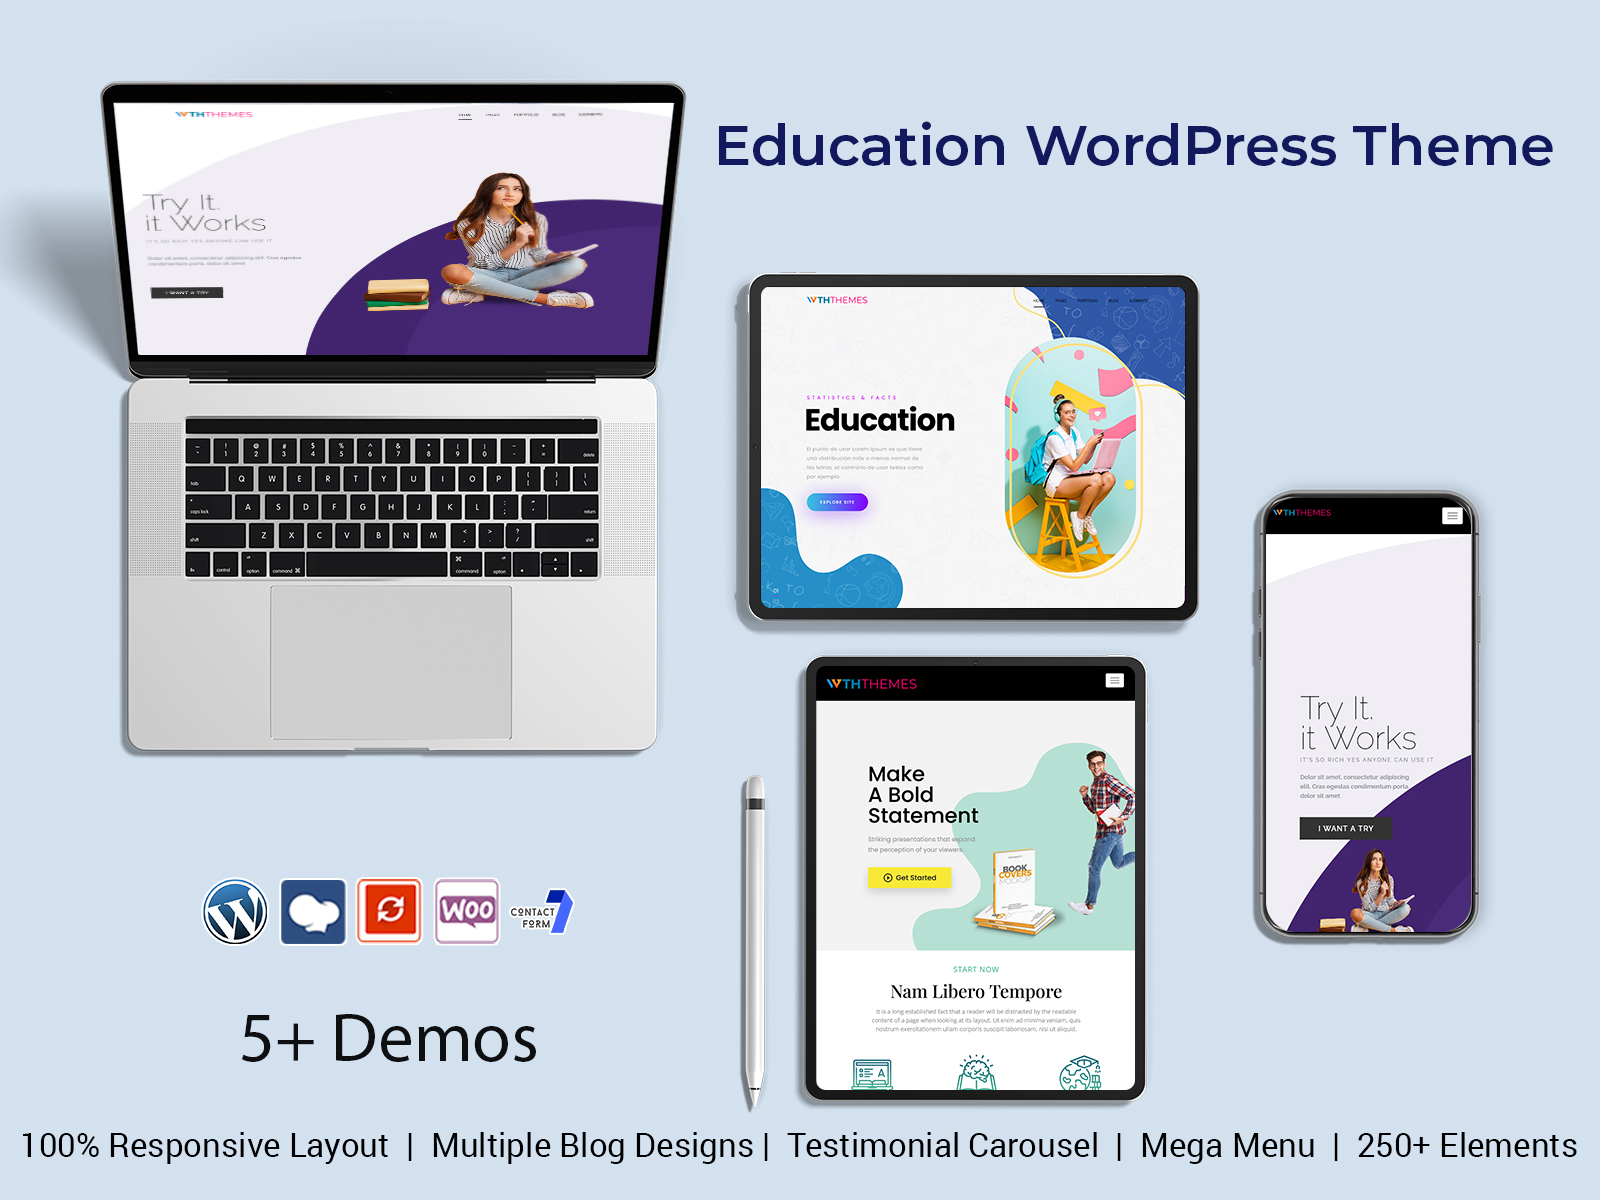 Find Beautiful And Clean LMS Education WordPress Theme